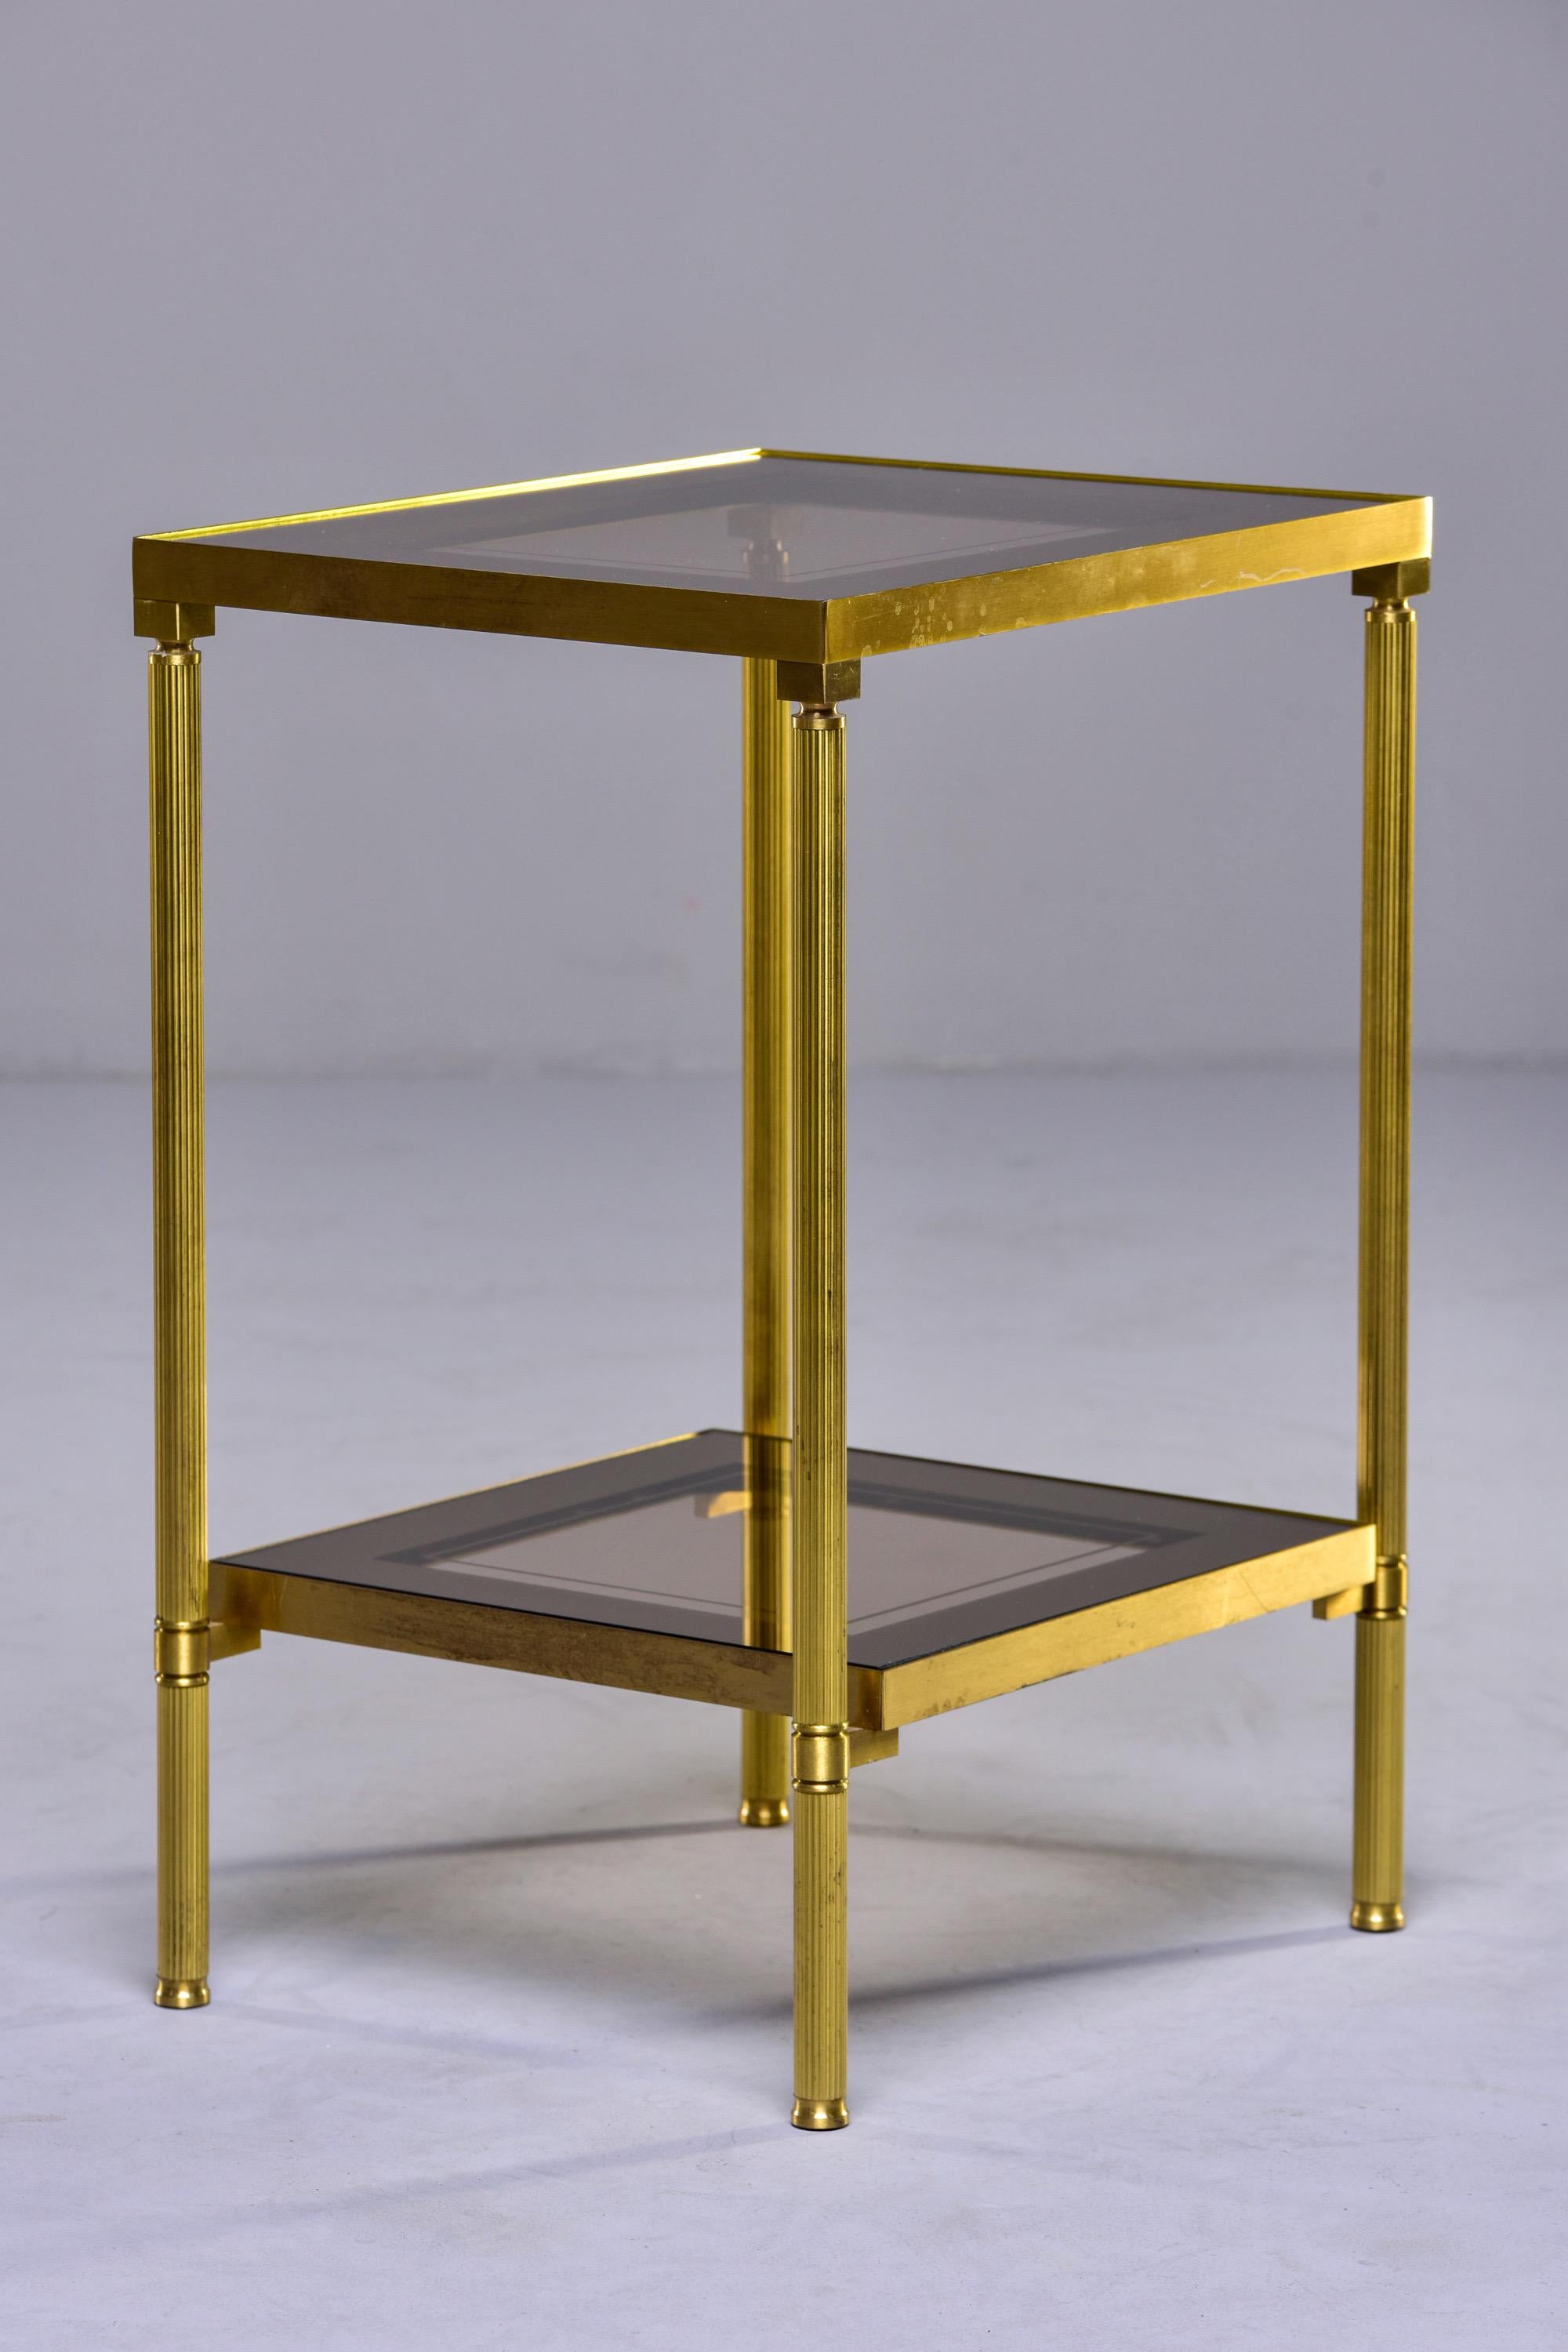 Circa 1940s French side table with brass frame and smoked glass table top and lower shelf with gold mirrored border. Unknown maker.